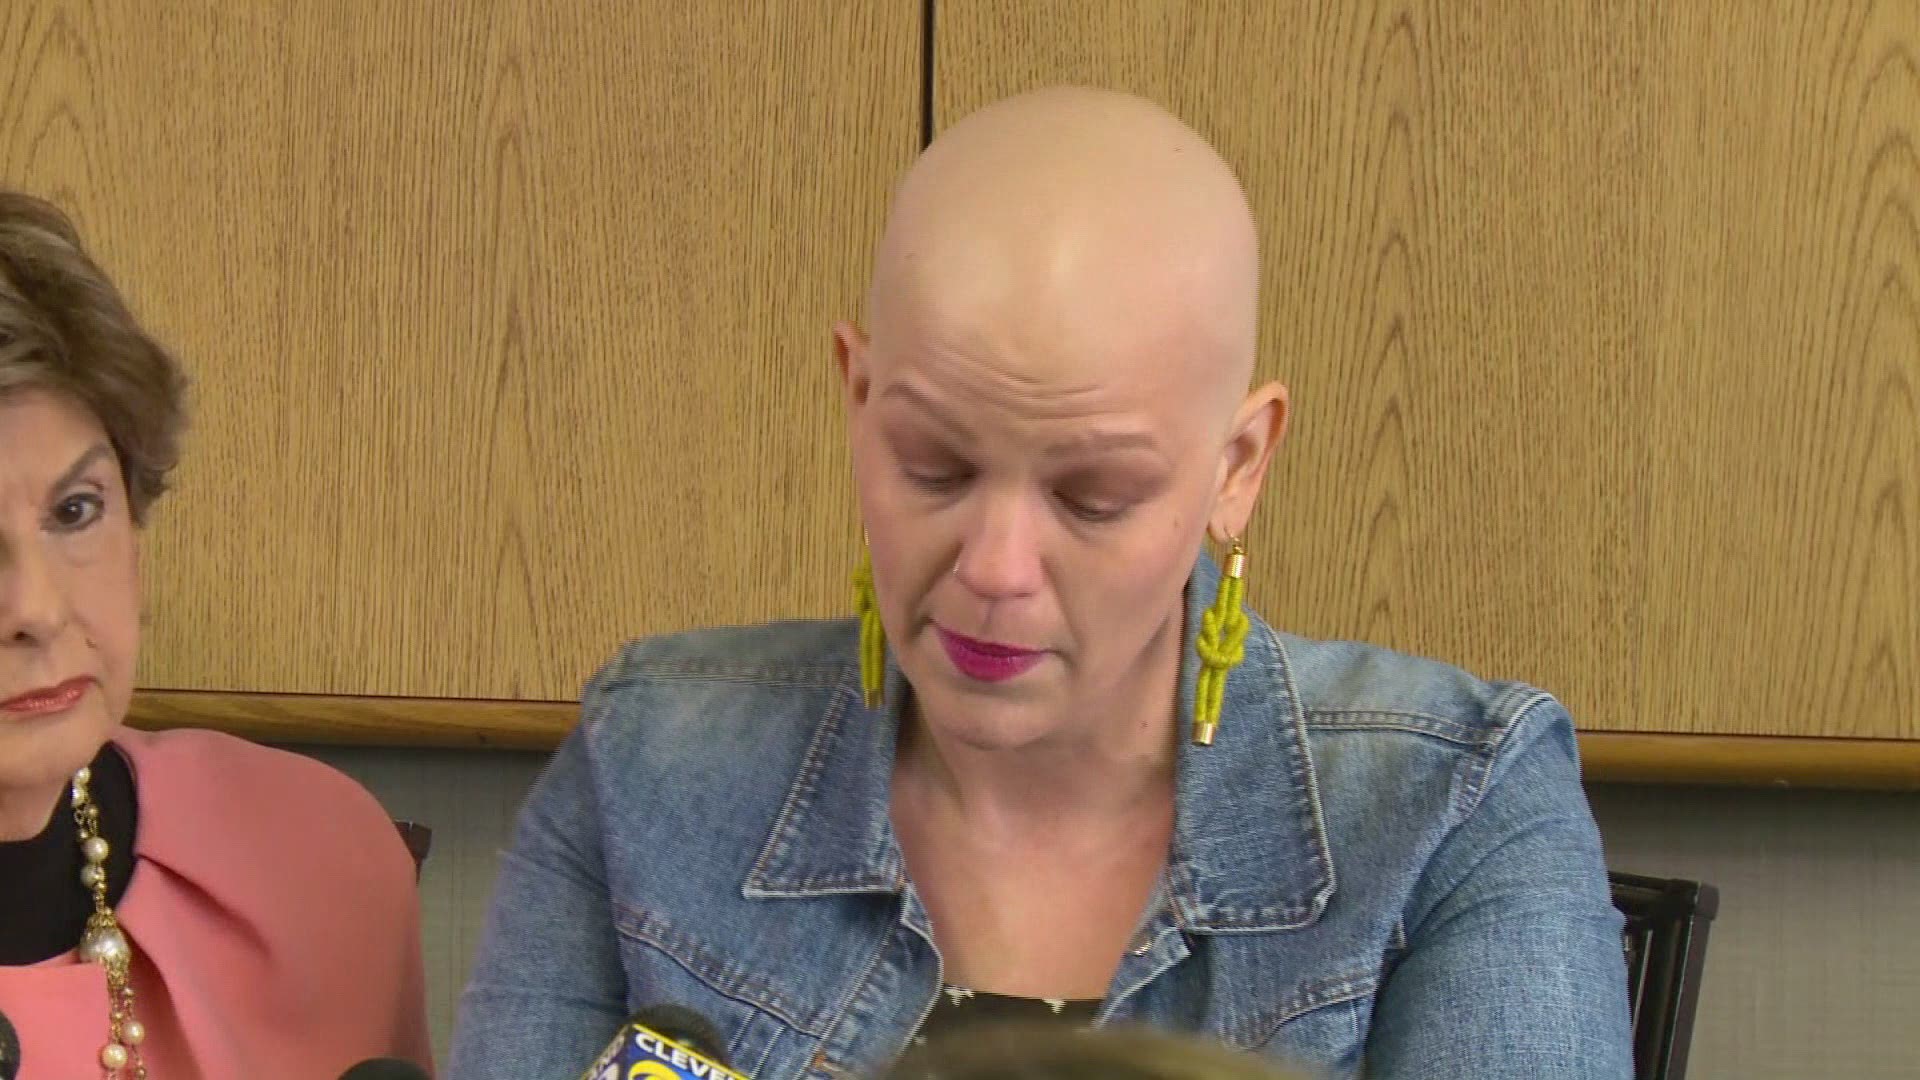 A cancer survivor impacted by University Hospitals fertility clinic failure discusses how the incident has impacted her. She's being represented by attorney Gloria Allred.